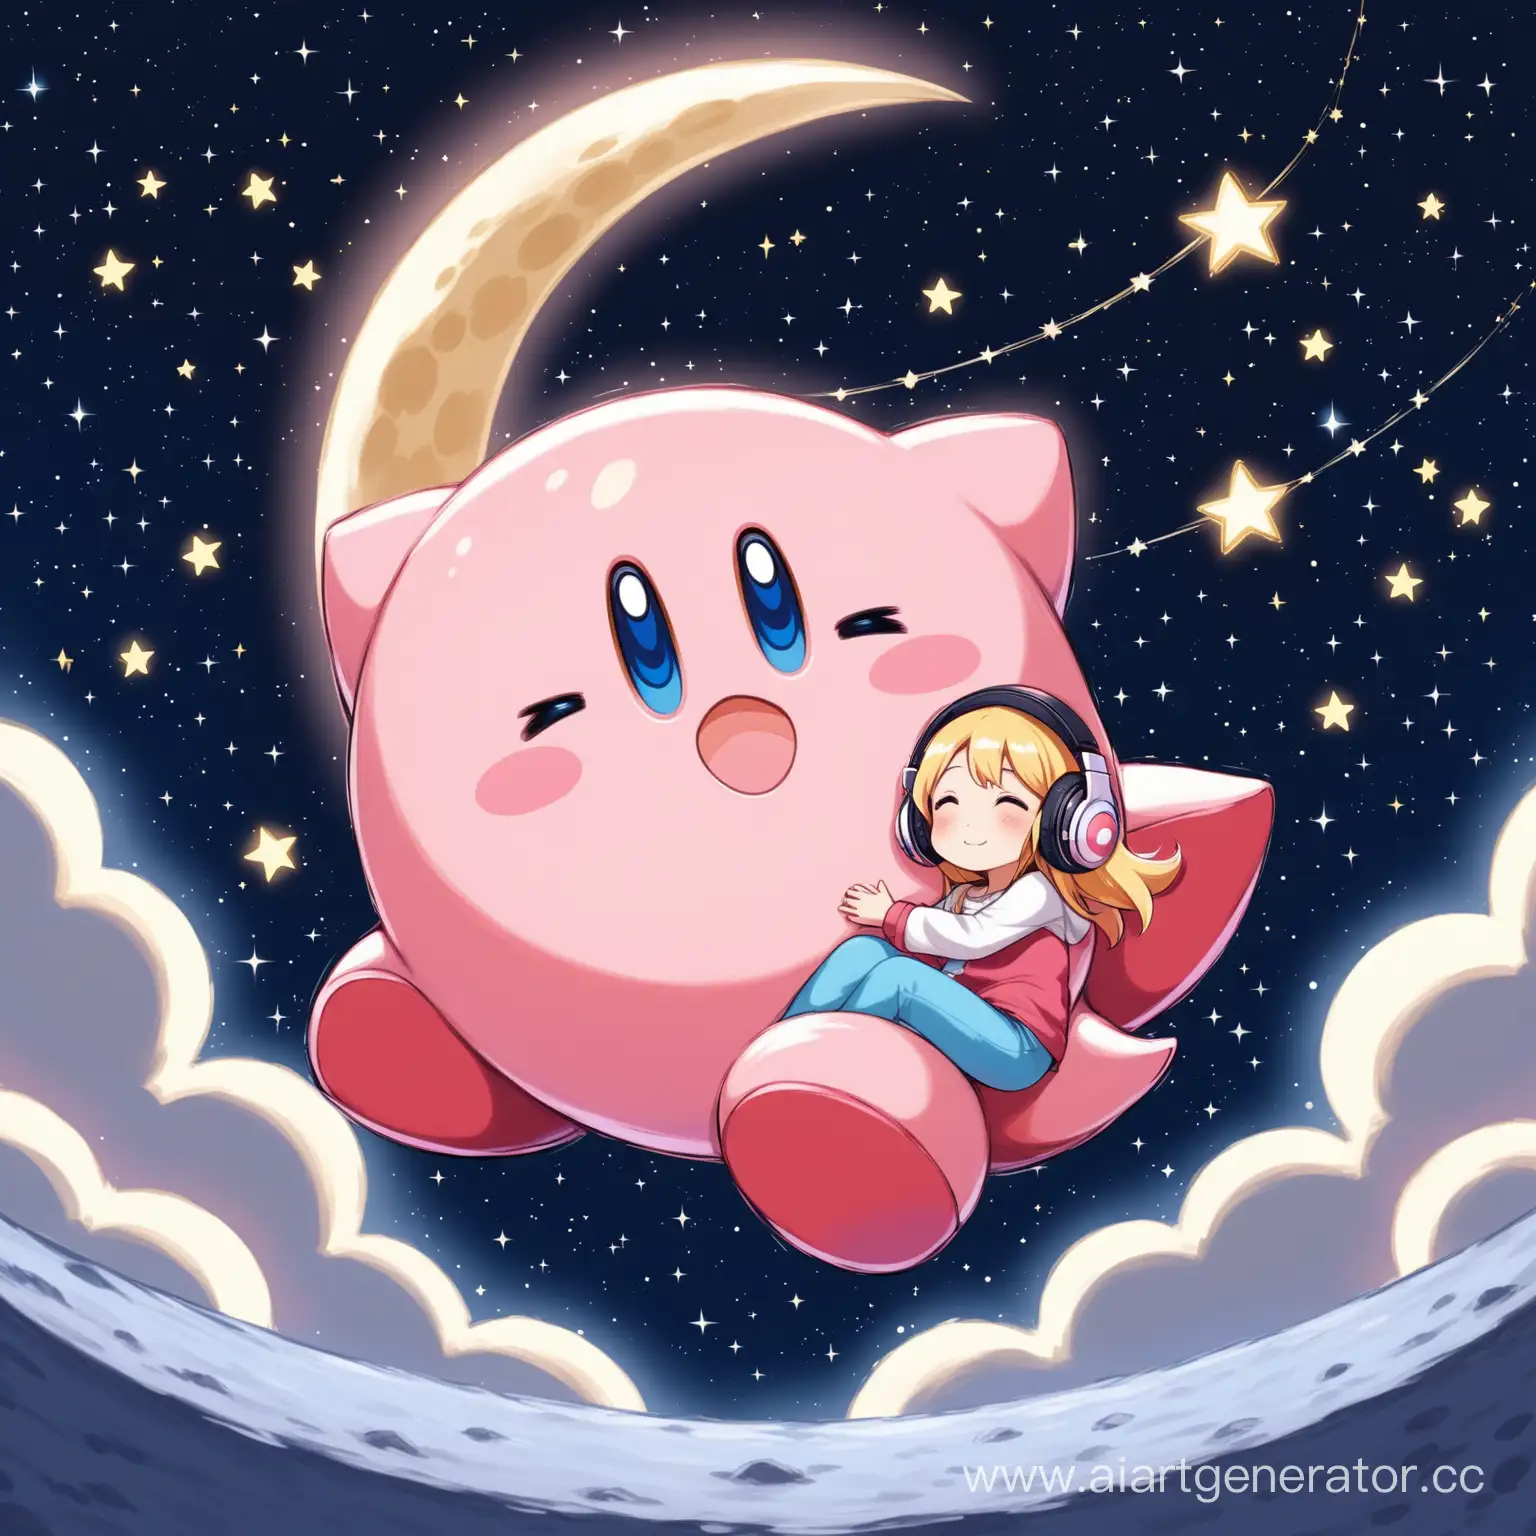 Girl-with-Headphones-Embracing-Kirby-on-the-Moon